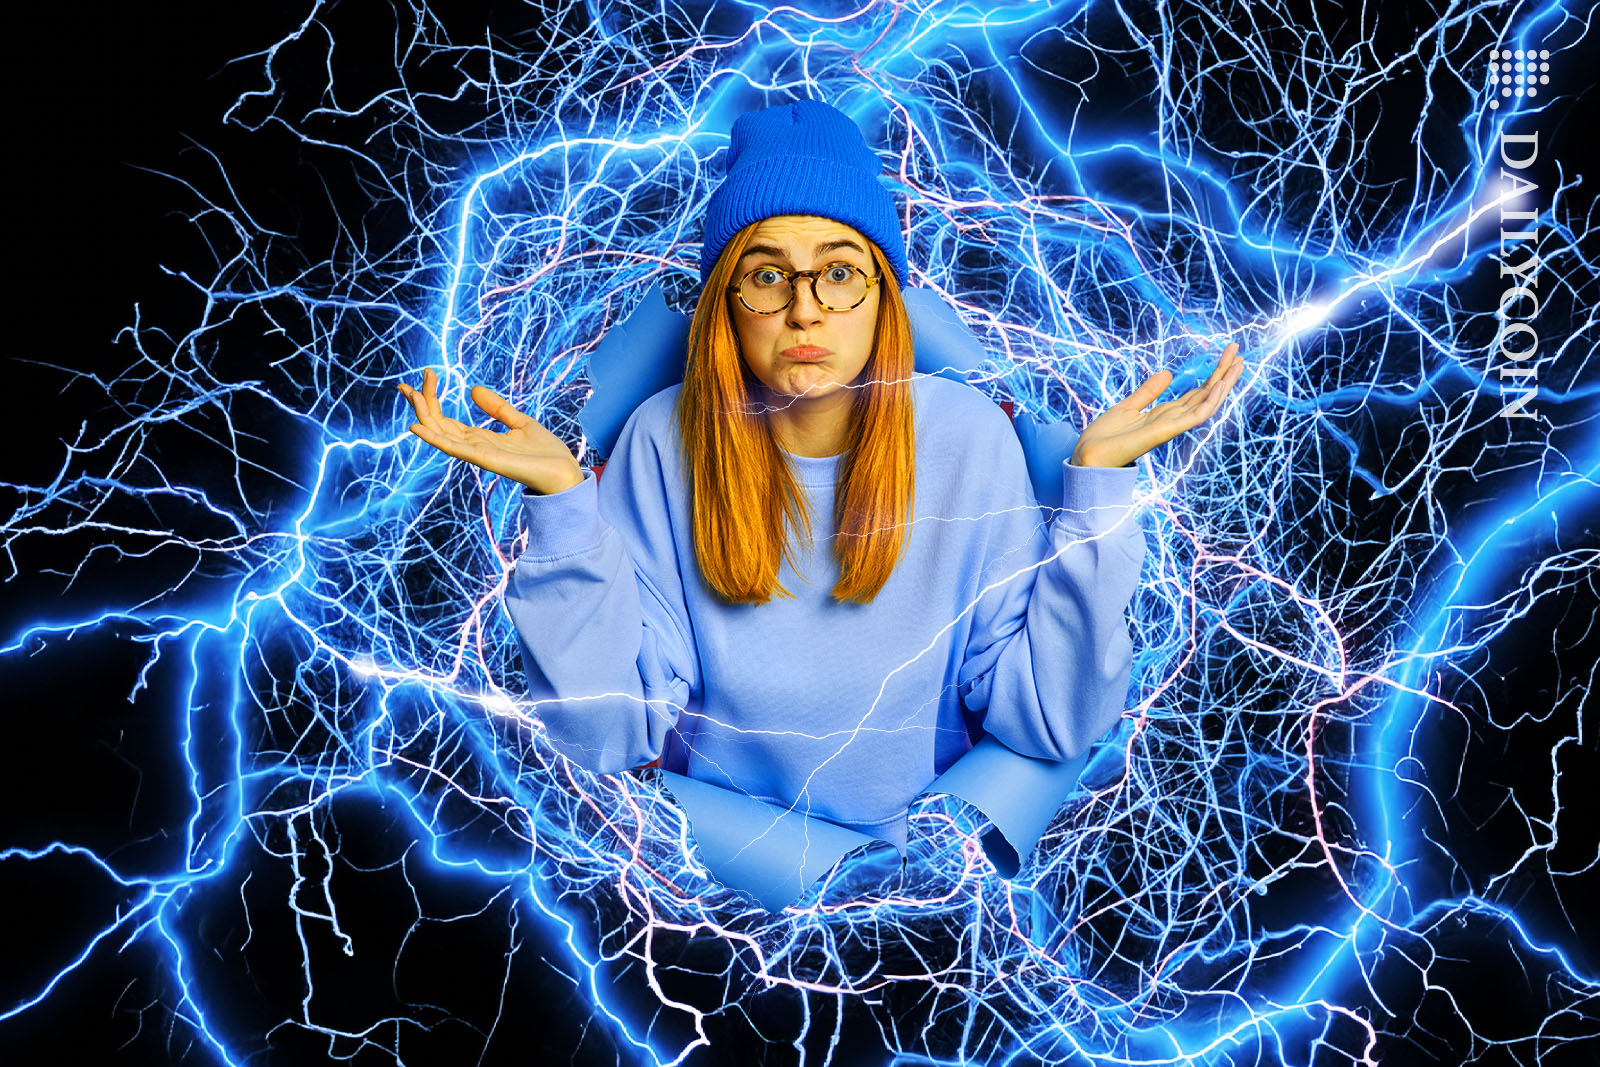 A girl in a blue hat and glasses looking very confused about something, breaking out of a digital mess.